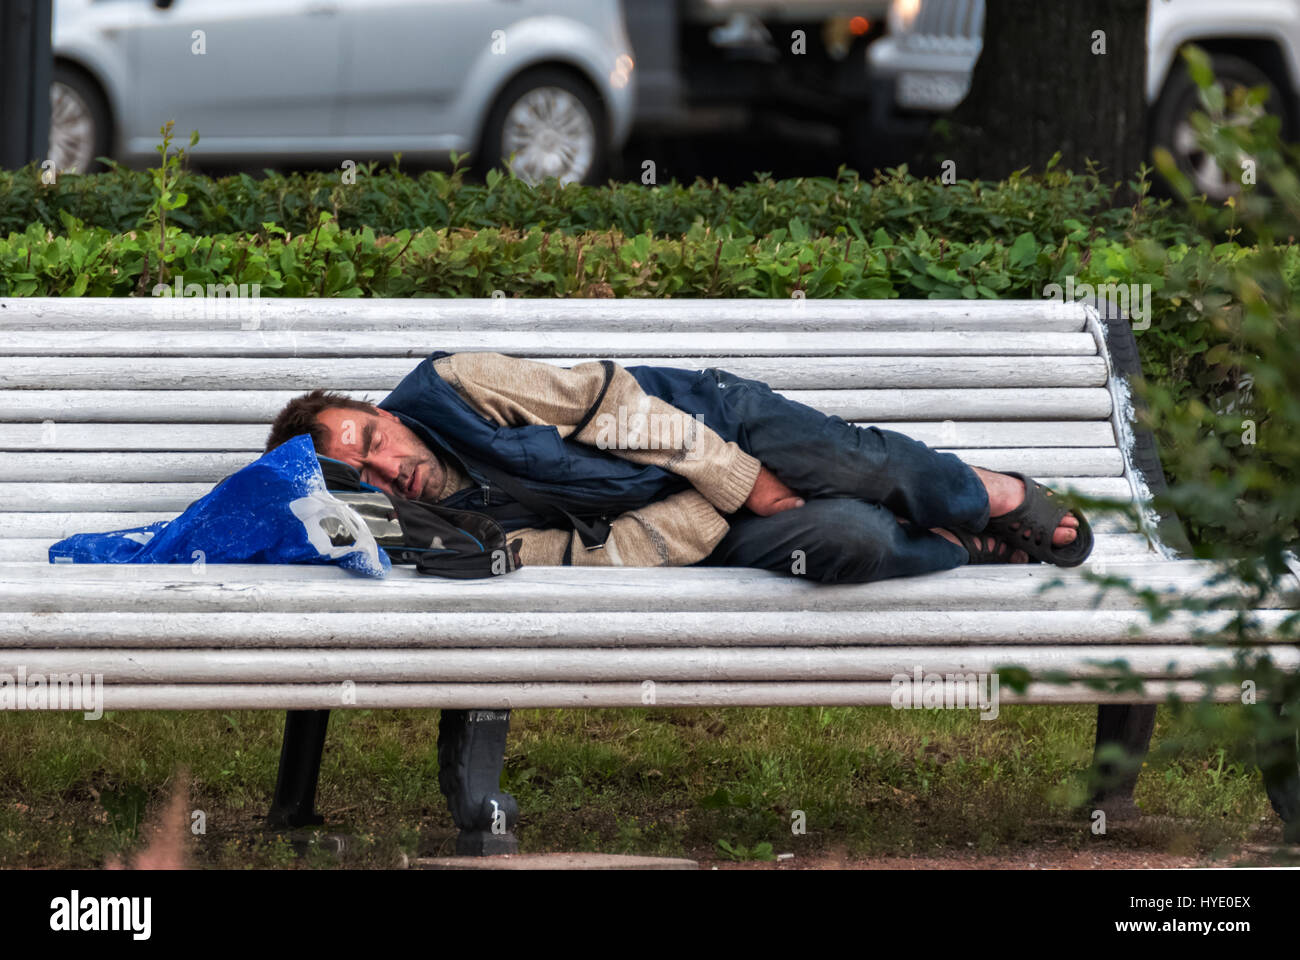 SAINT PETERSBURG, RUSSIA, may 15: A homeless man sleeping on a bench in the town square, in the morning may 15, 2016. Stock Photo